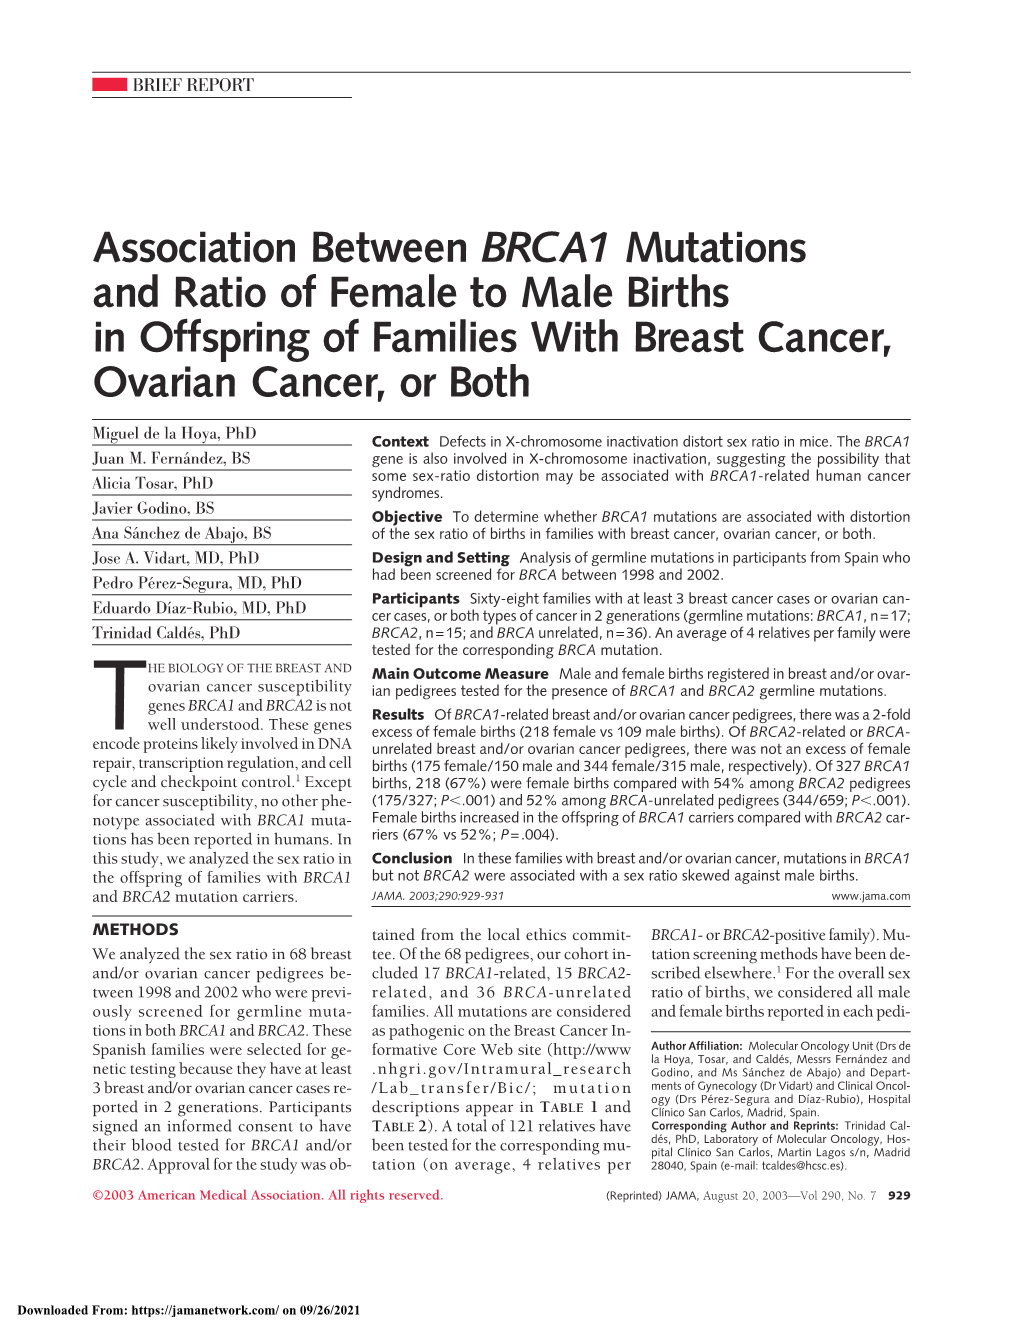 Association Between BRCA1 Mutations and Ratio of Female to Male Births in Offspring of Families with Breast Cancer, Ovarian Cancer, Or Both